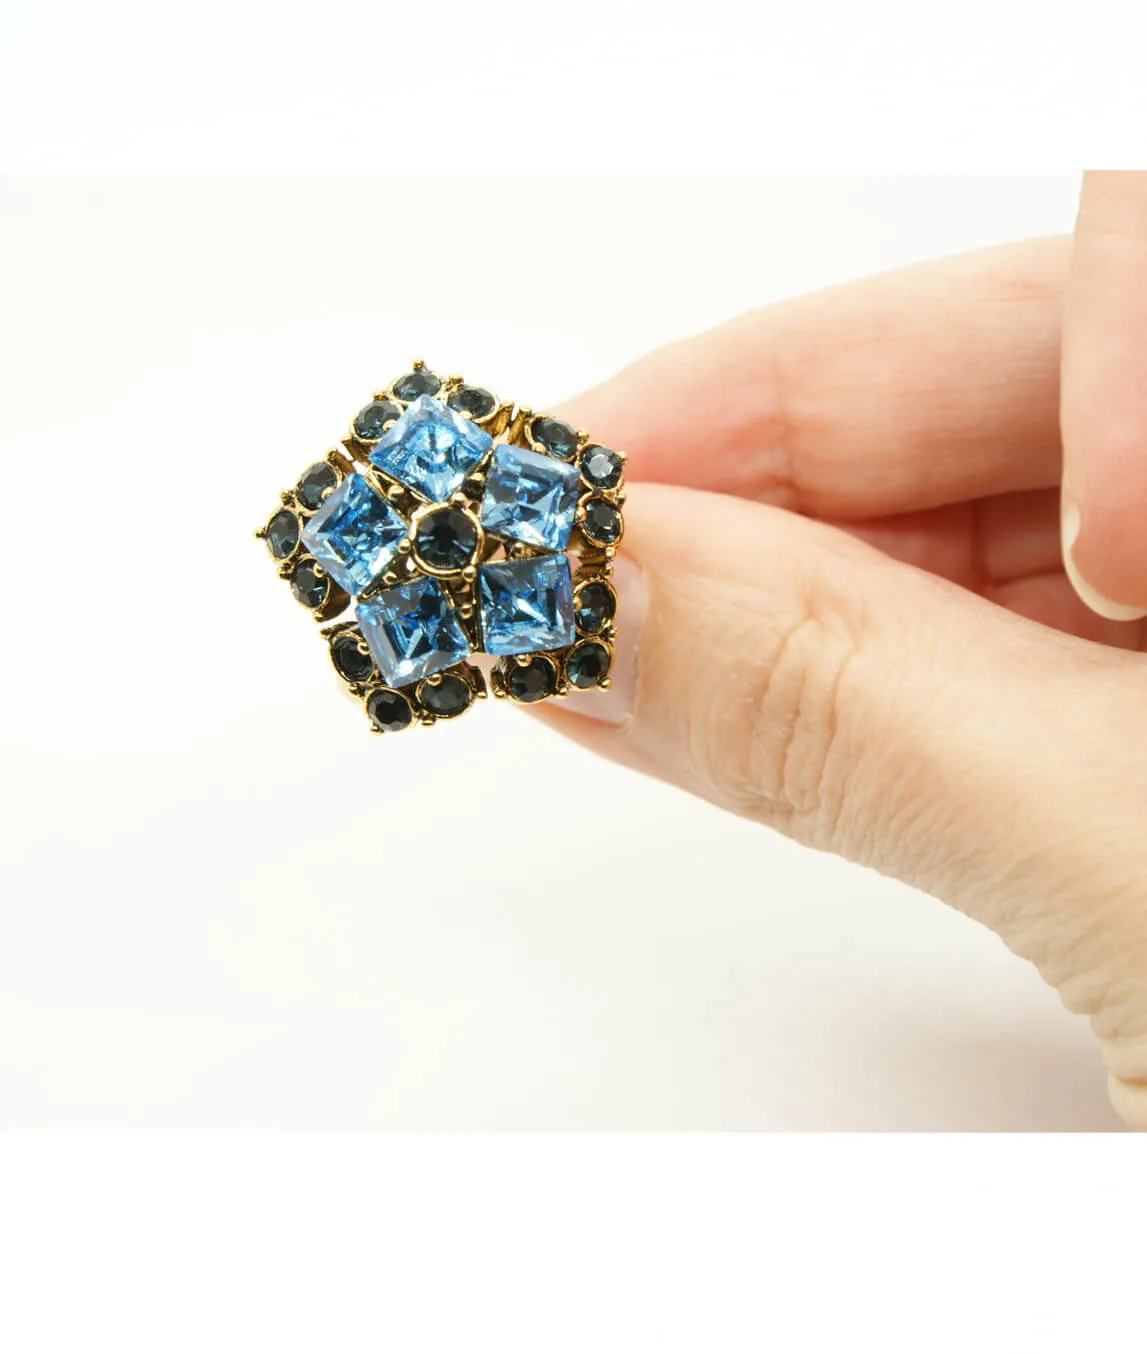 Large vintage ring in blue and gold